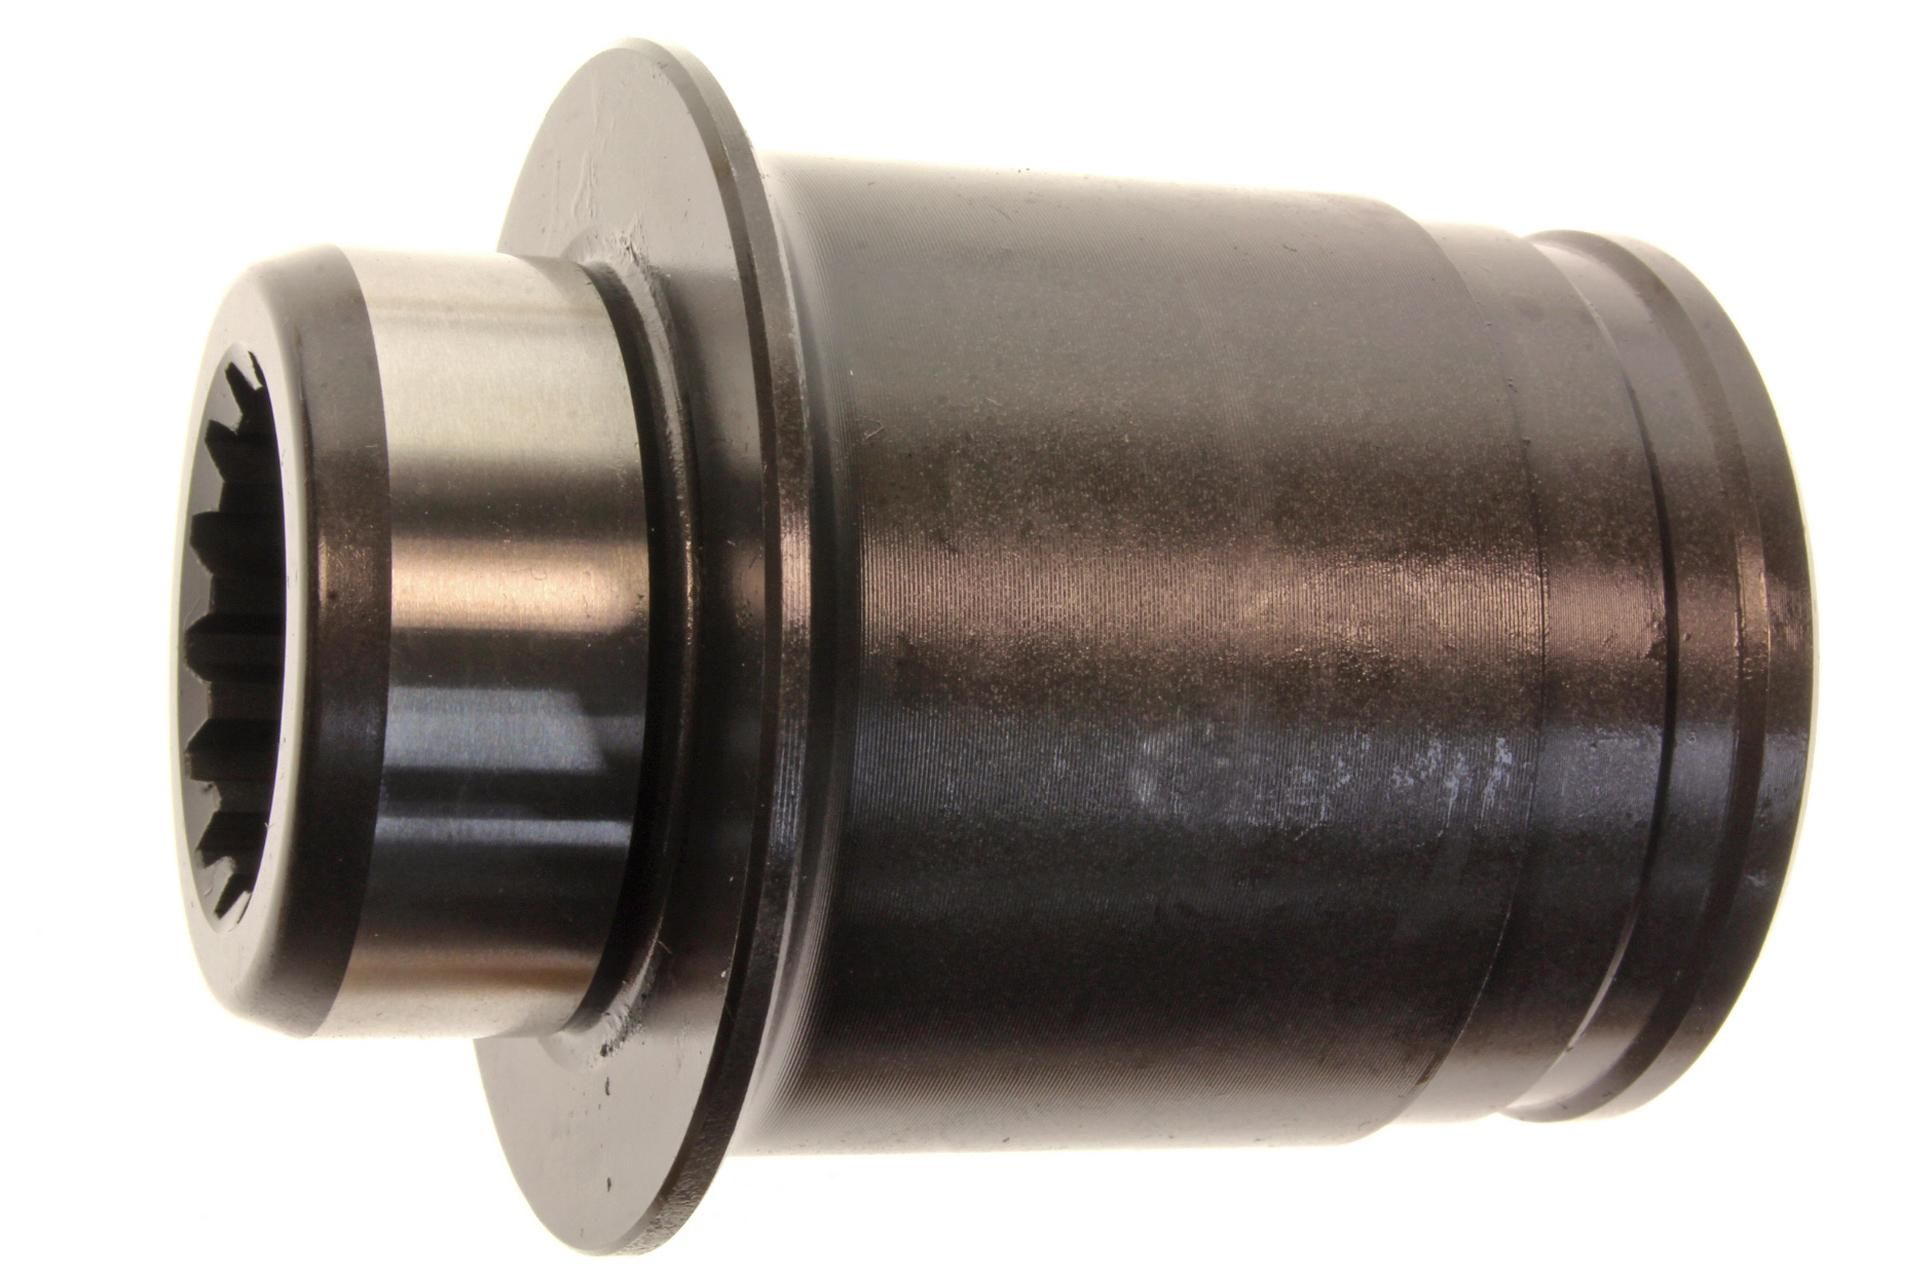 3B4-46126-00-00 Superseded by 3B4-46126-10-00 - COUPLING